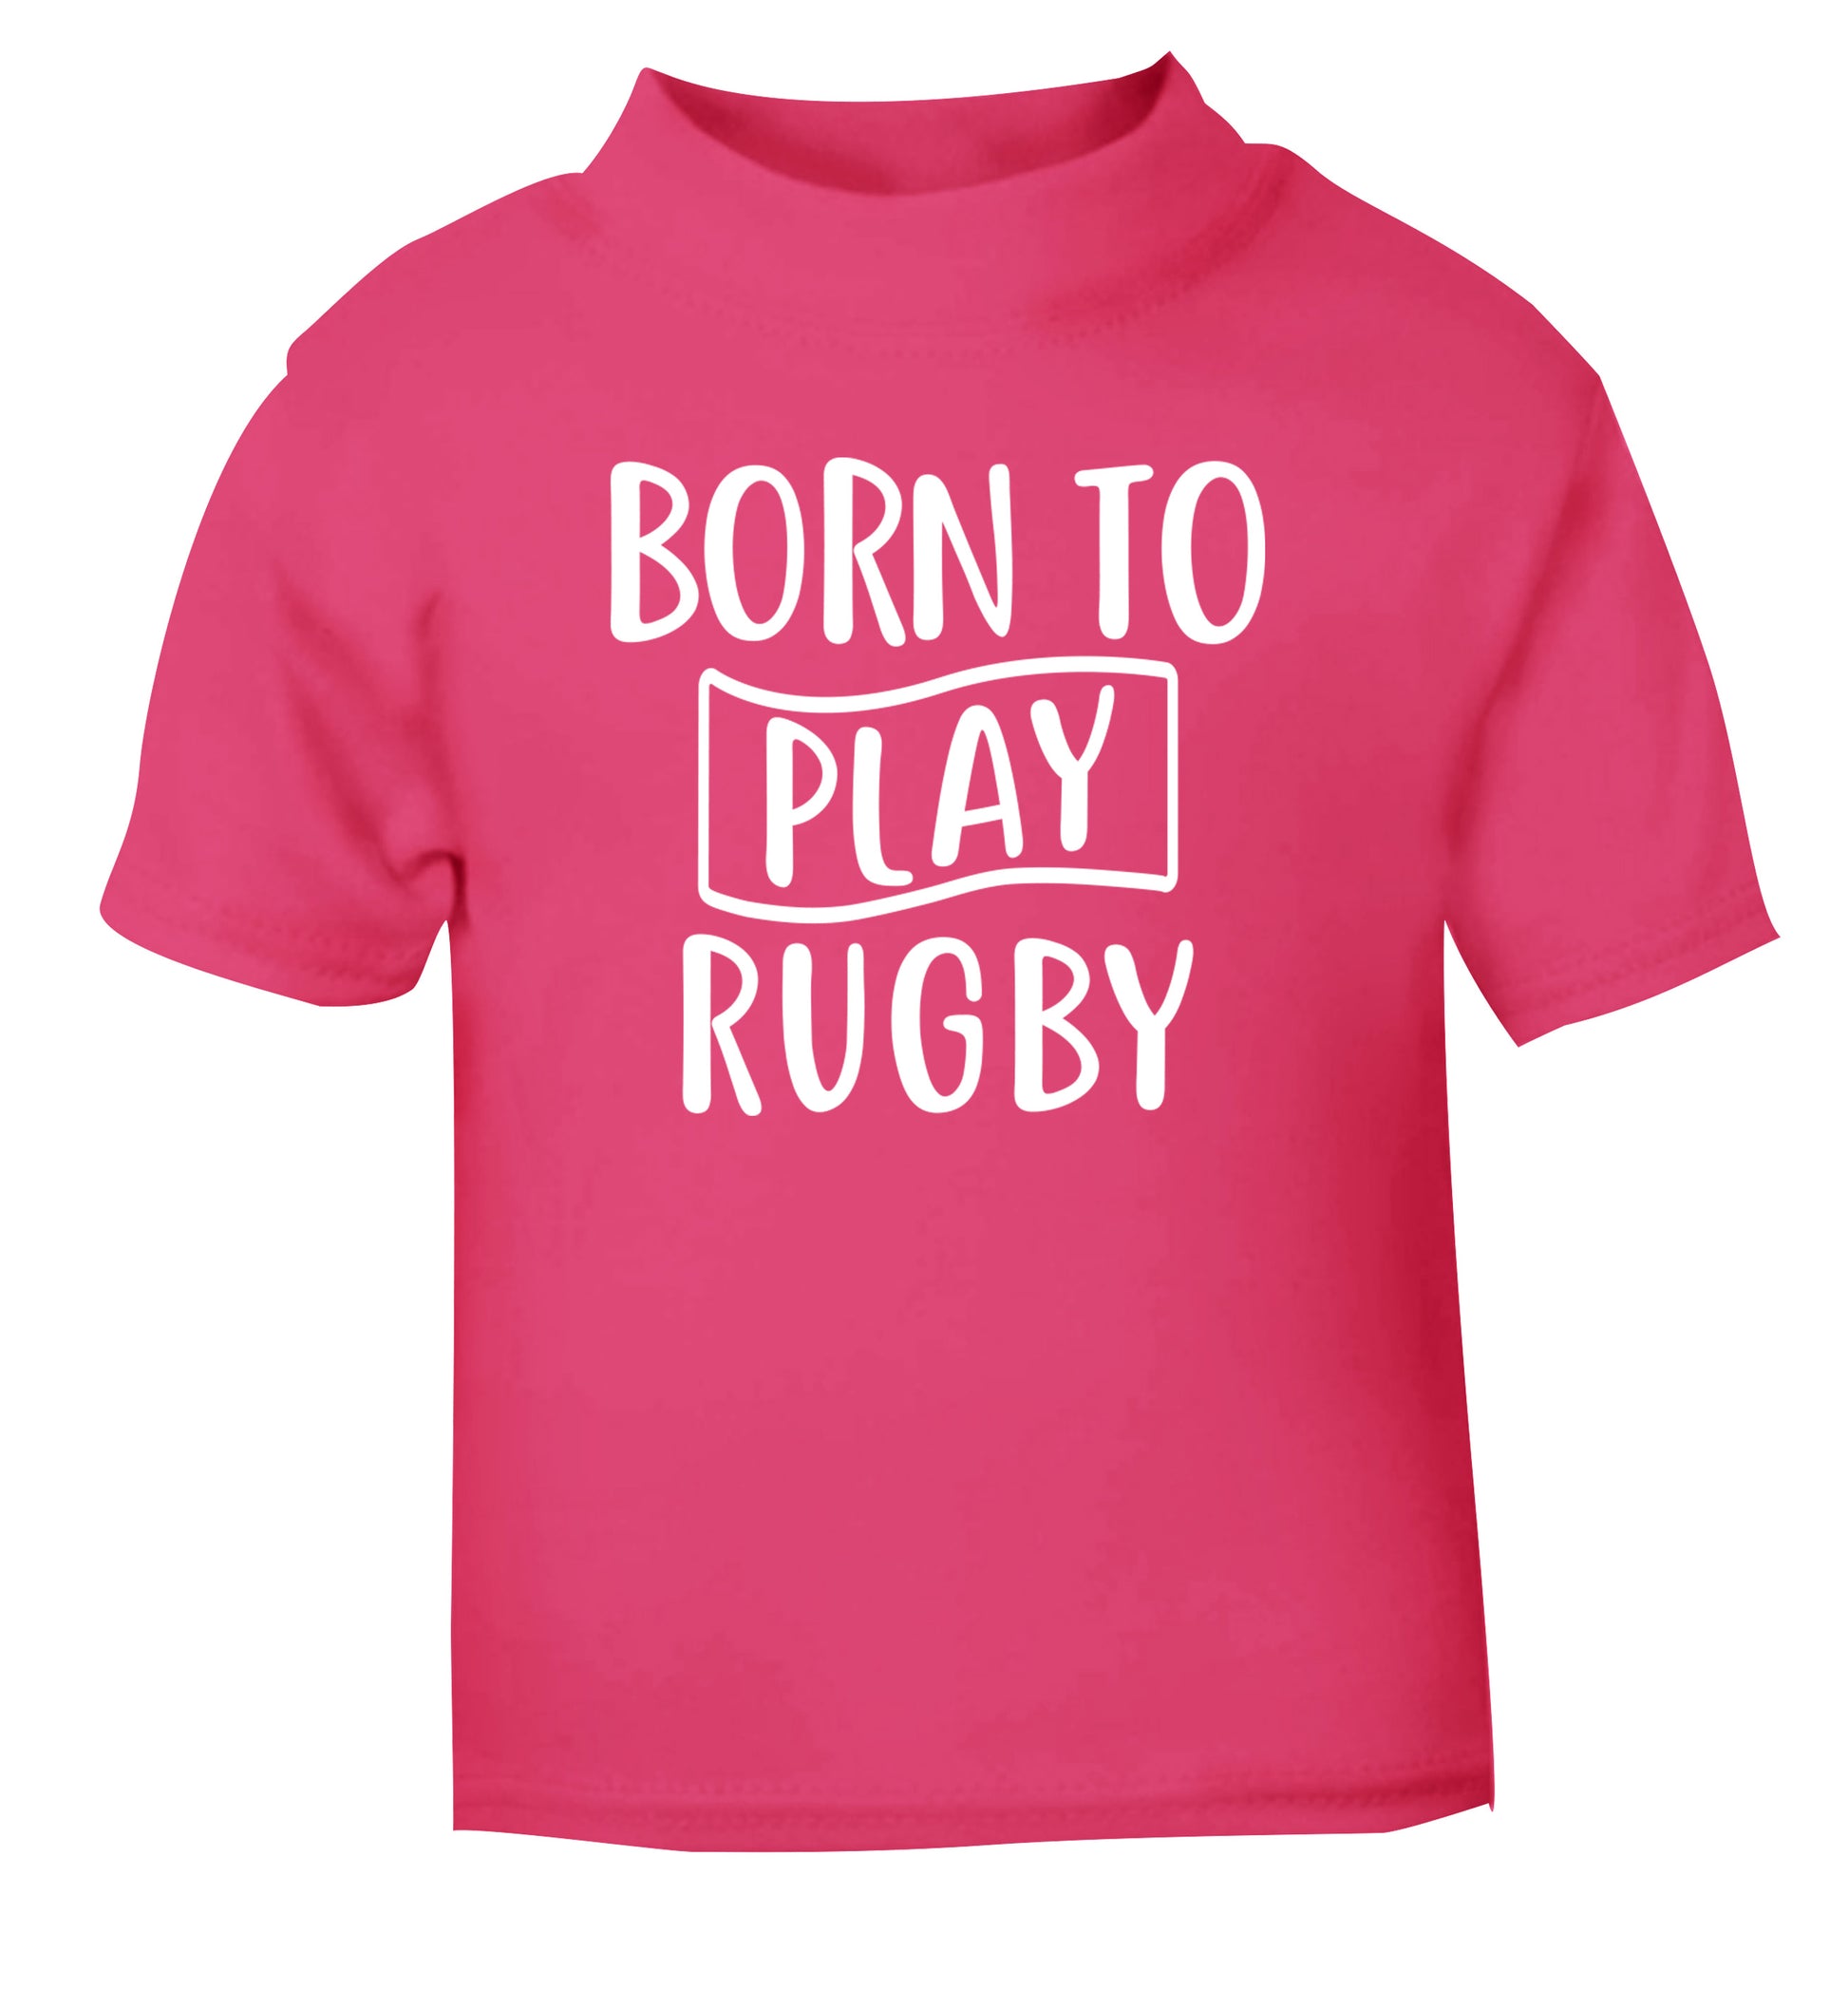 Born to play rugby pink Baby Toddler Tshirt 2 Years